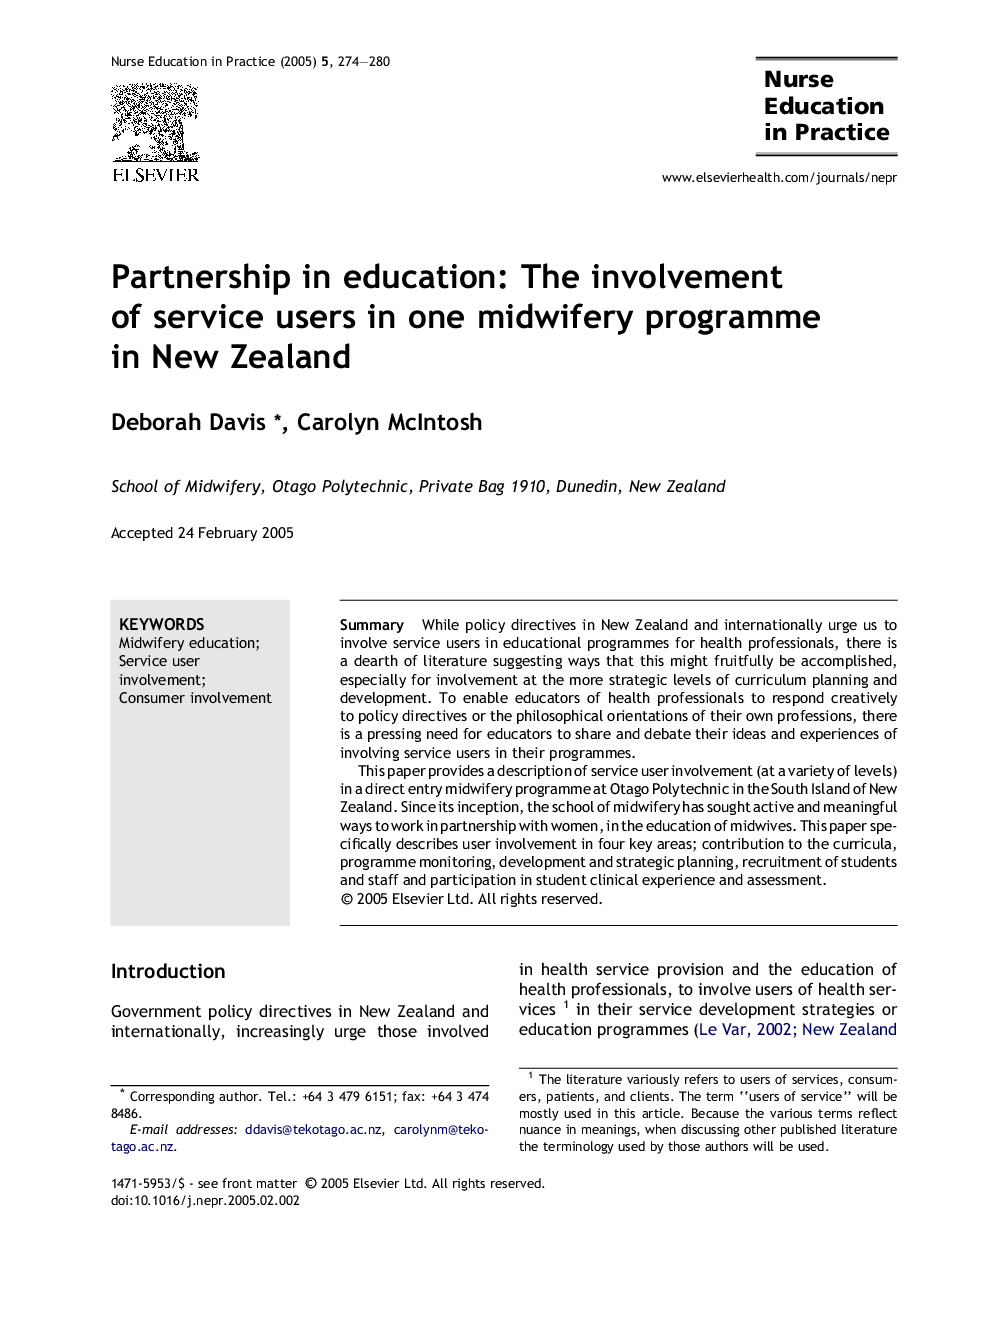 Partnership in education: The involvement of service users in one midwifery programme in New Zealand